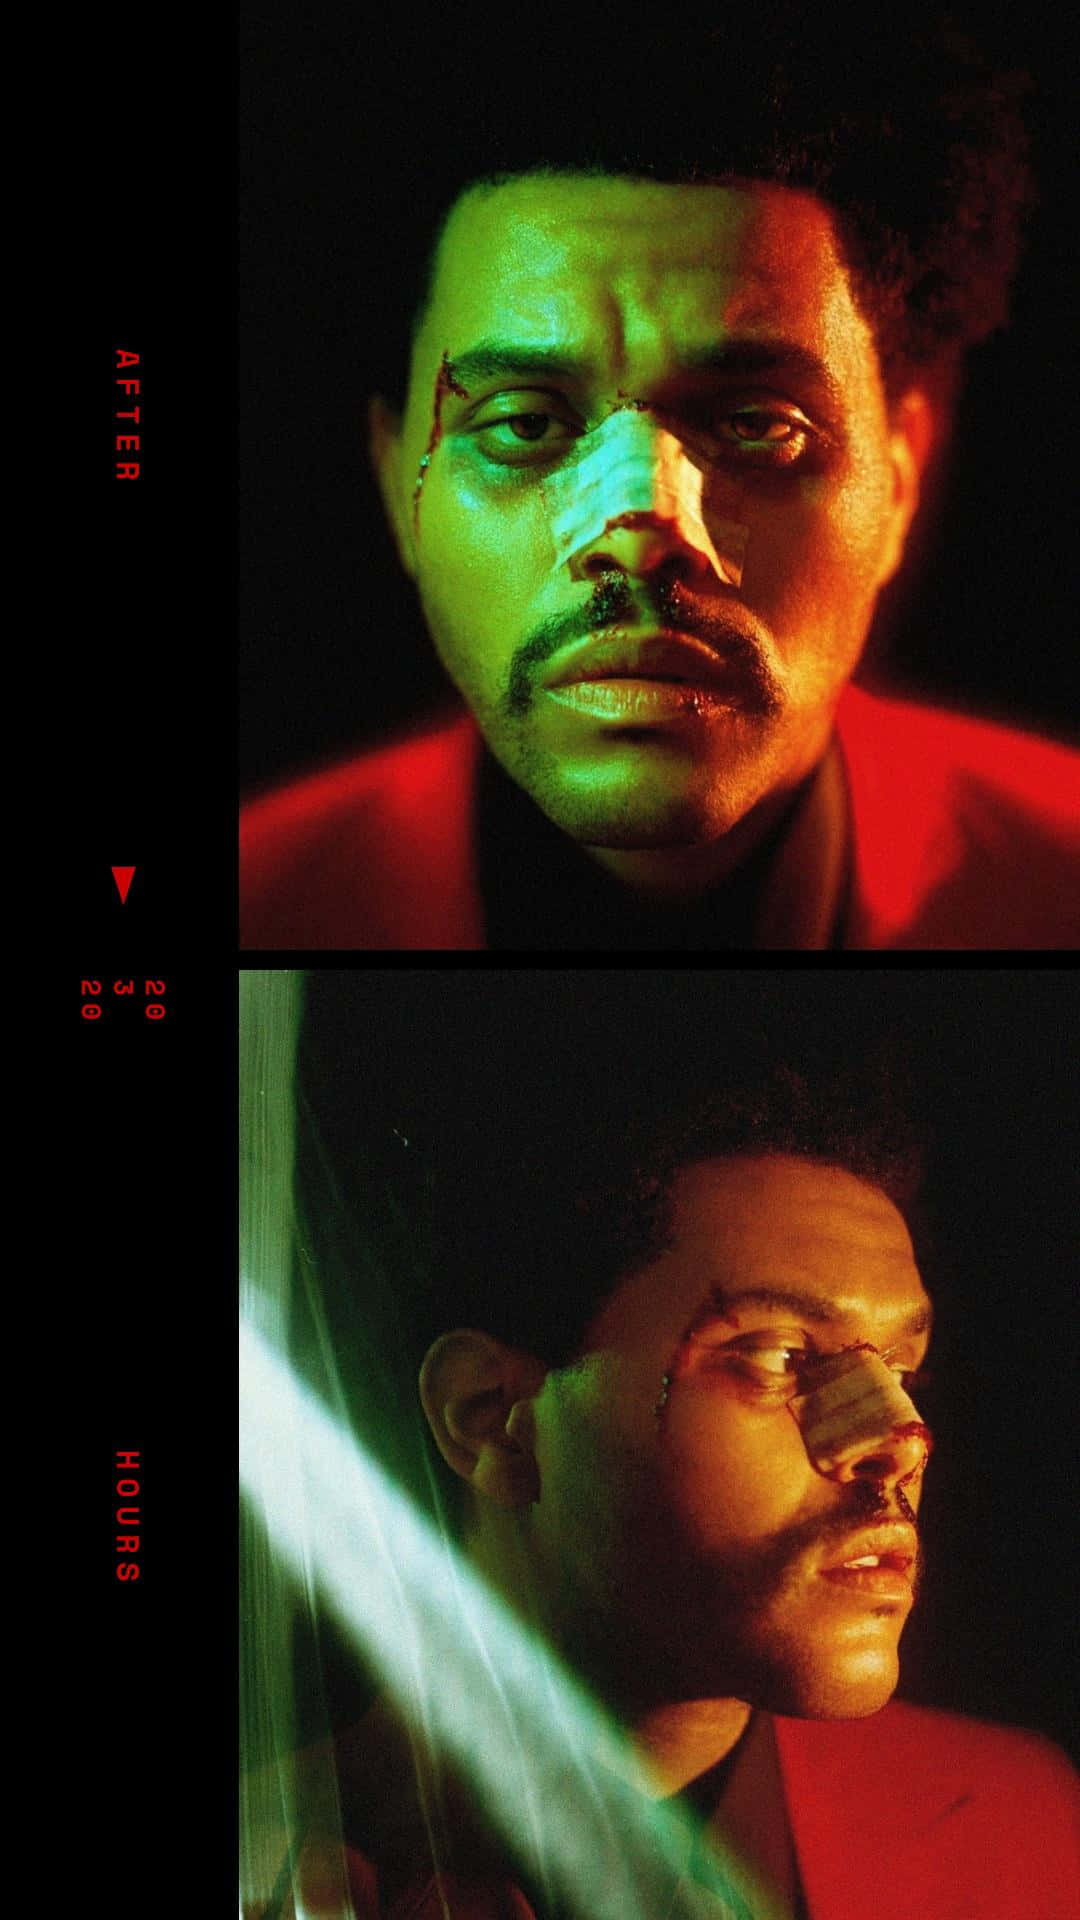 The Weeknd - After Hours Album Cover Embrace Wallpaper